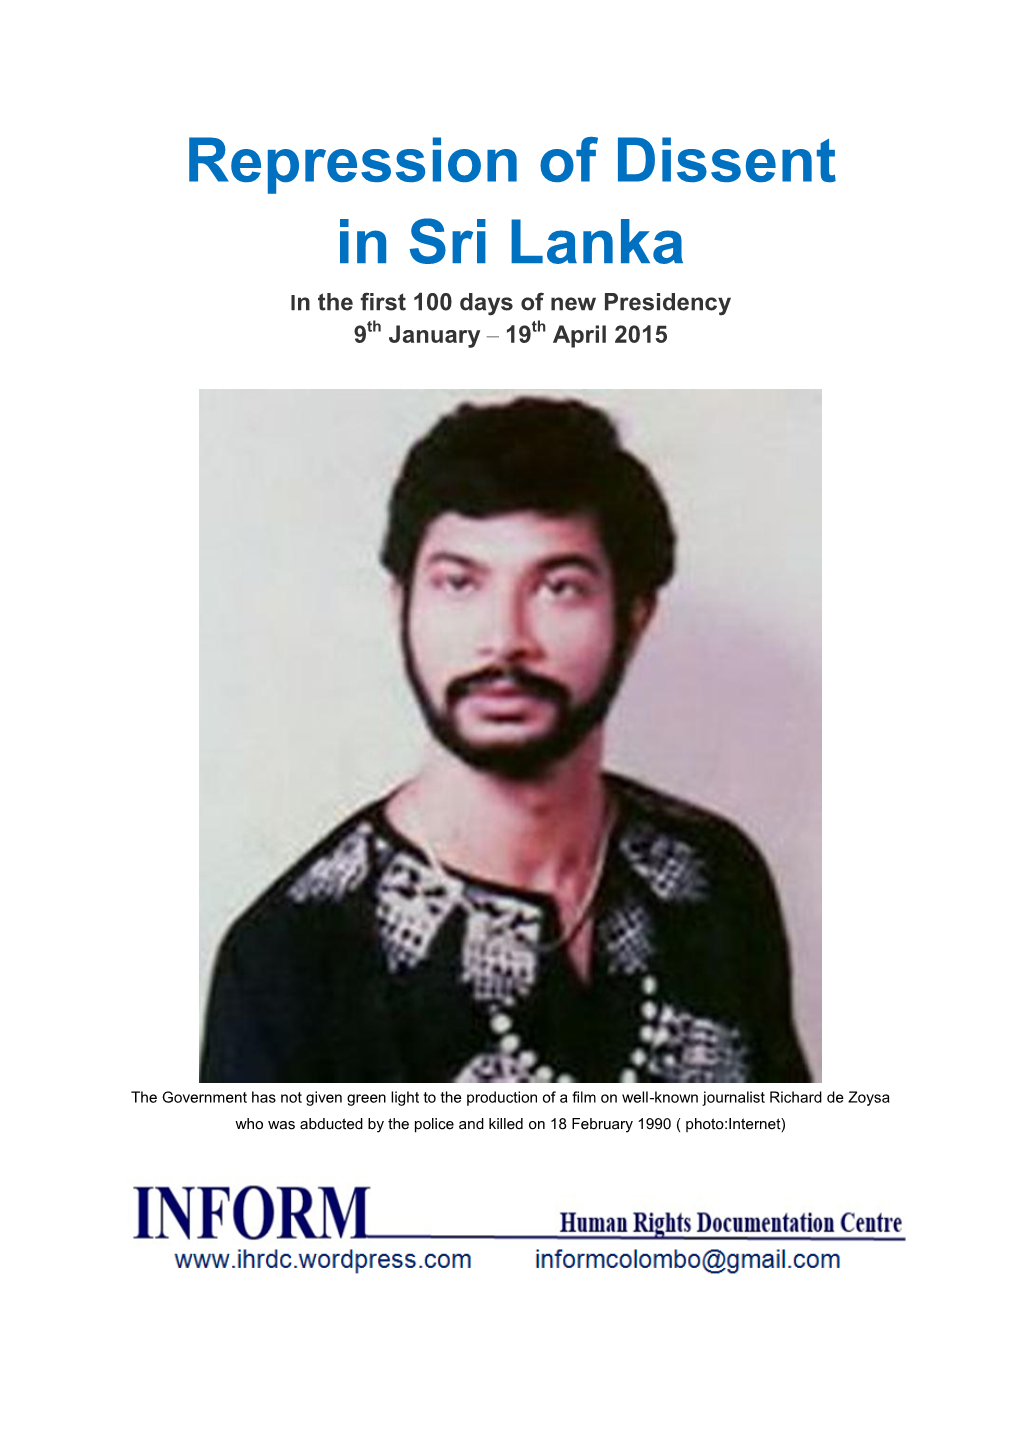 Repression of Dissent in Sri Lanka in the First 100 Days of New Presidency 9Th January – 19Th April 2015